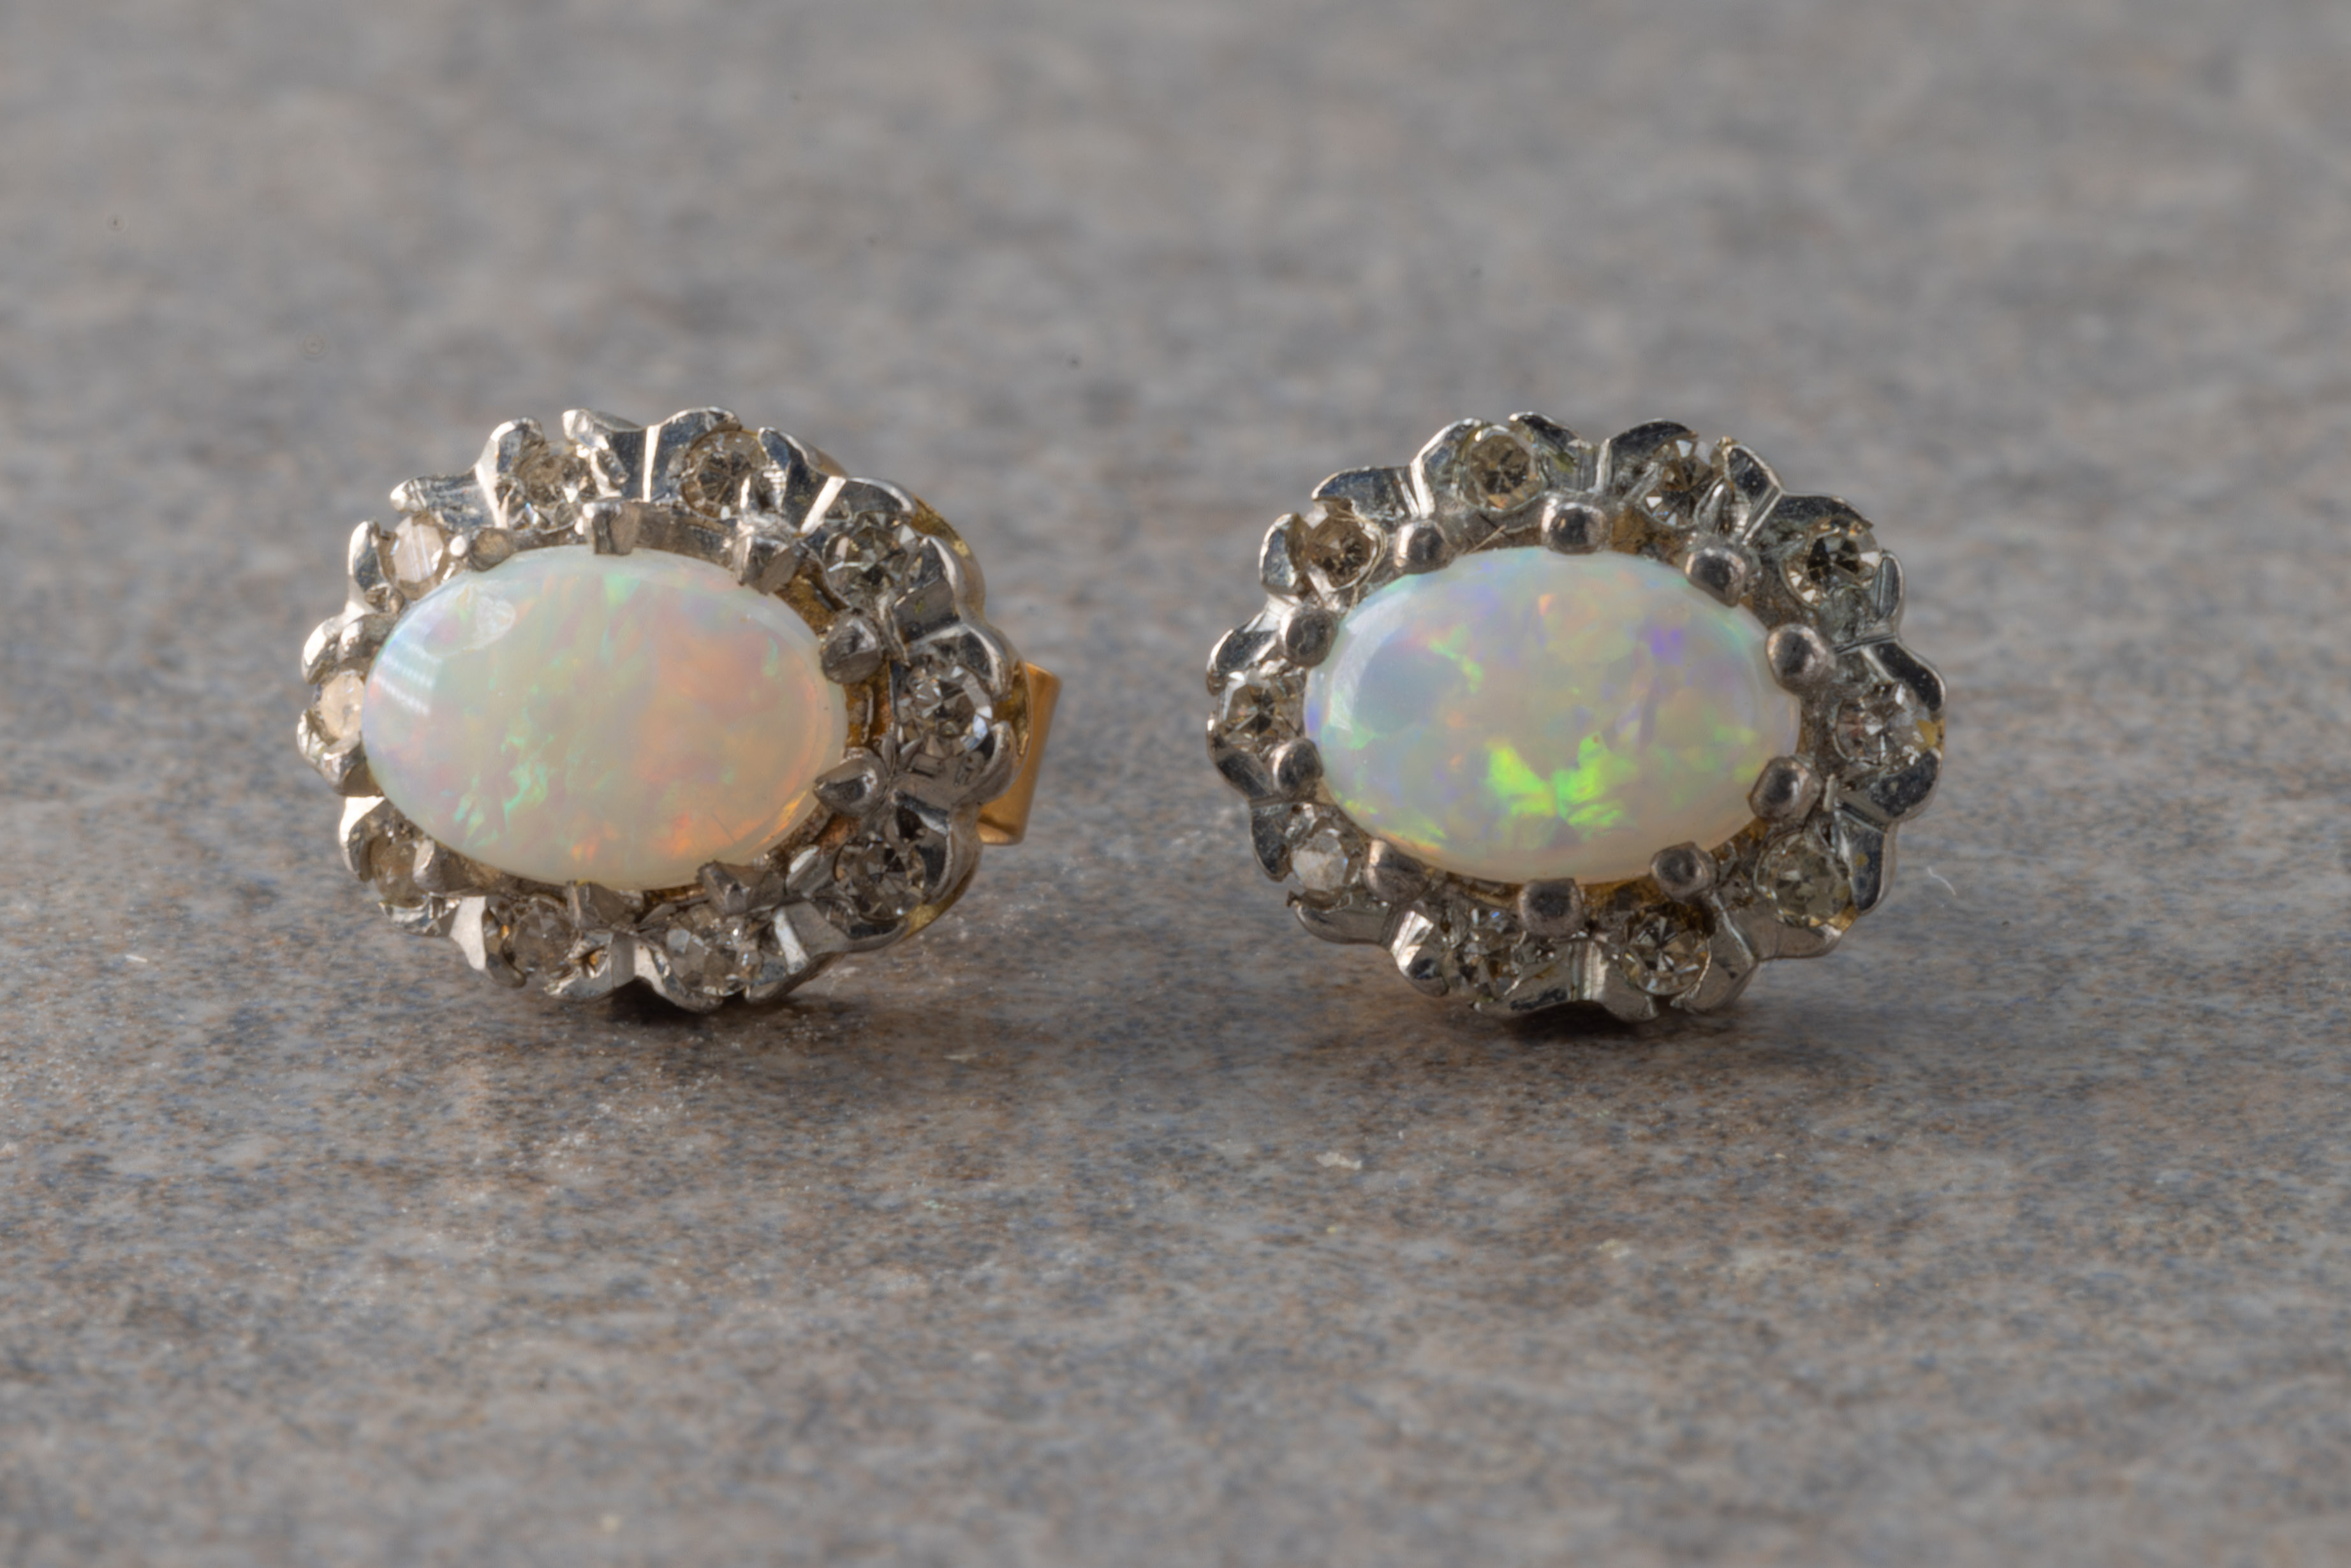 A pair of opal and diamond earrings